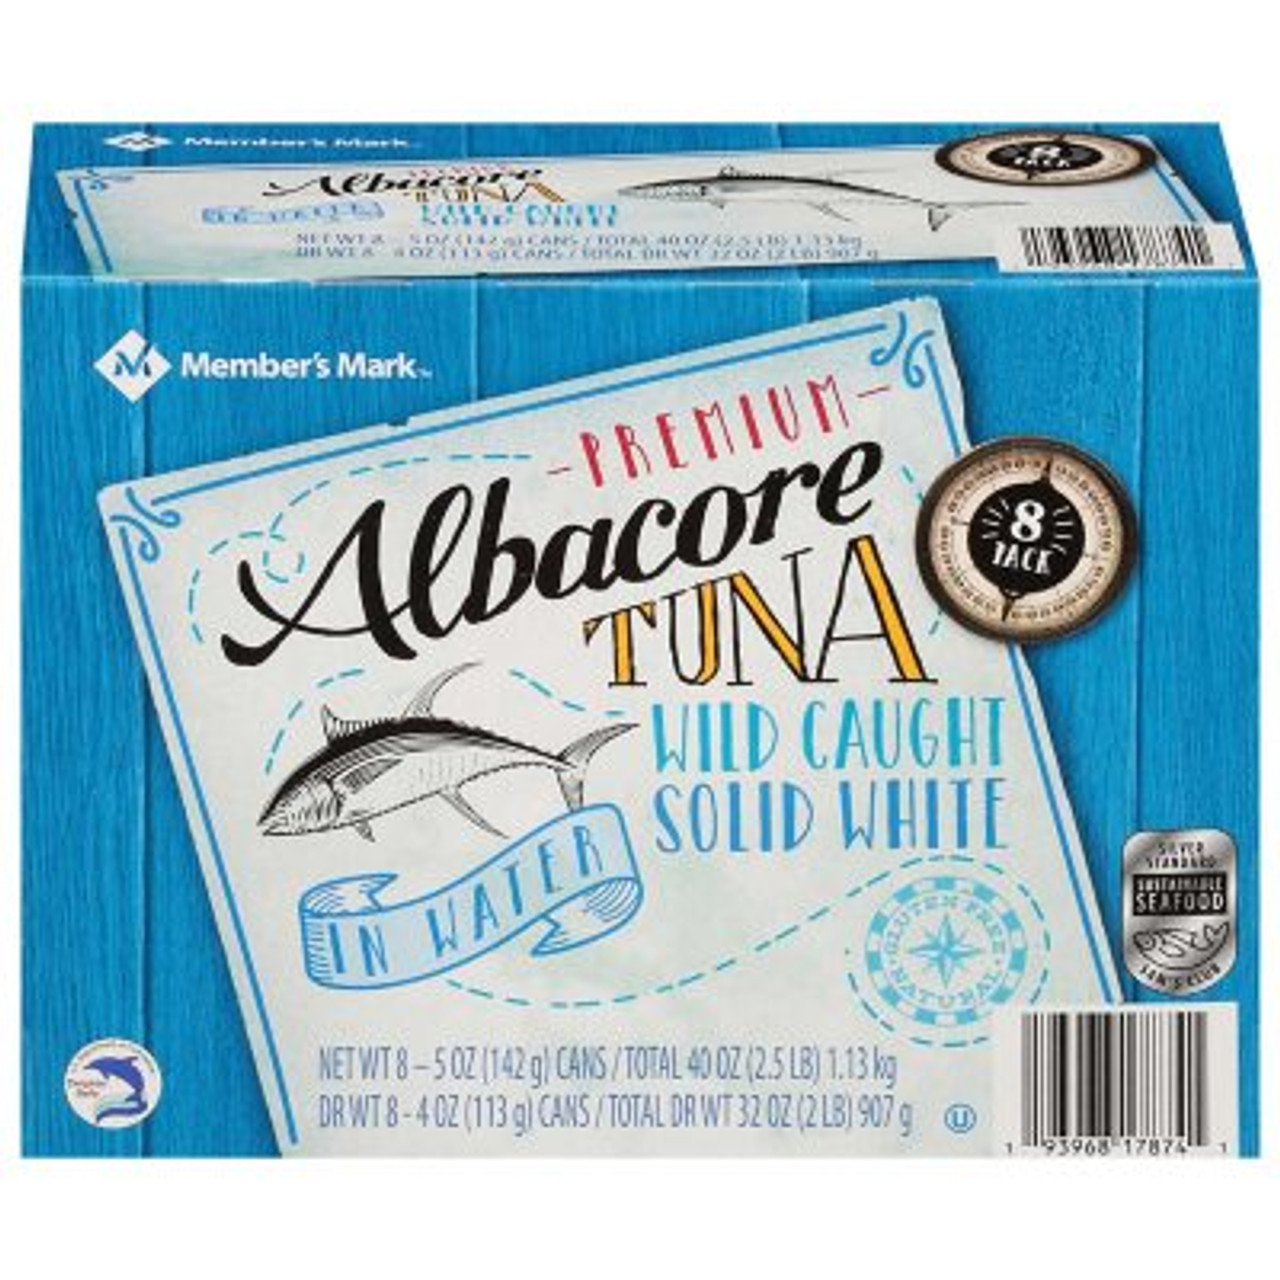 Member's Mark Solid White Albacore Tuna (5 oz., 8 pk.) - [From 64.00 - Choose pk Qty ] - *Ships from Miami